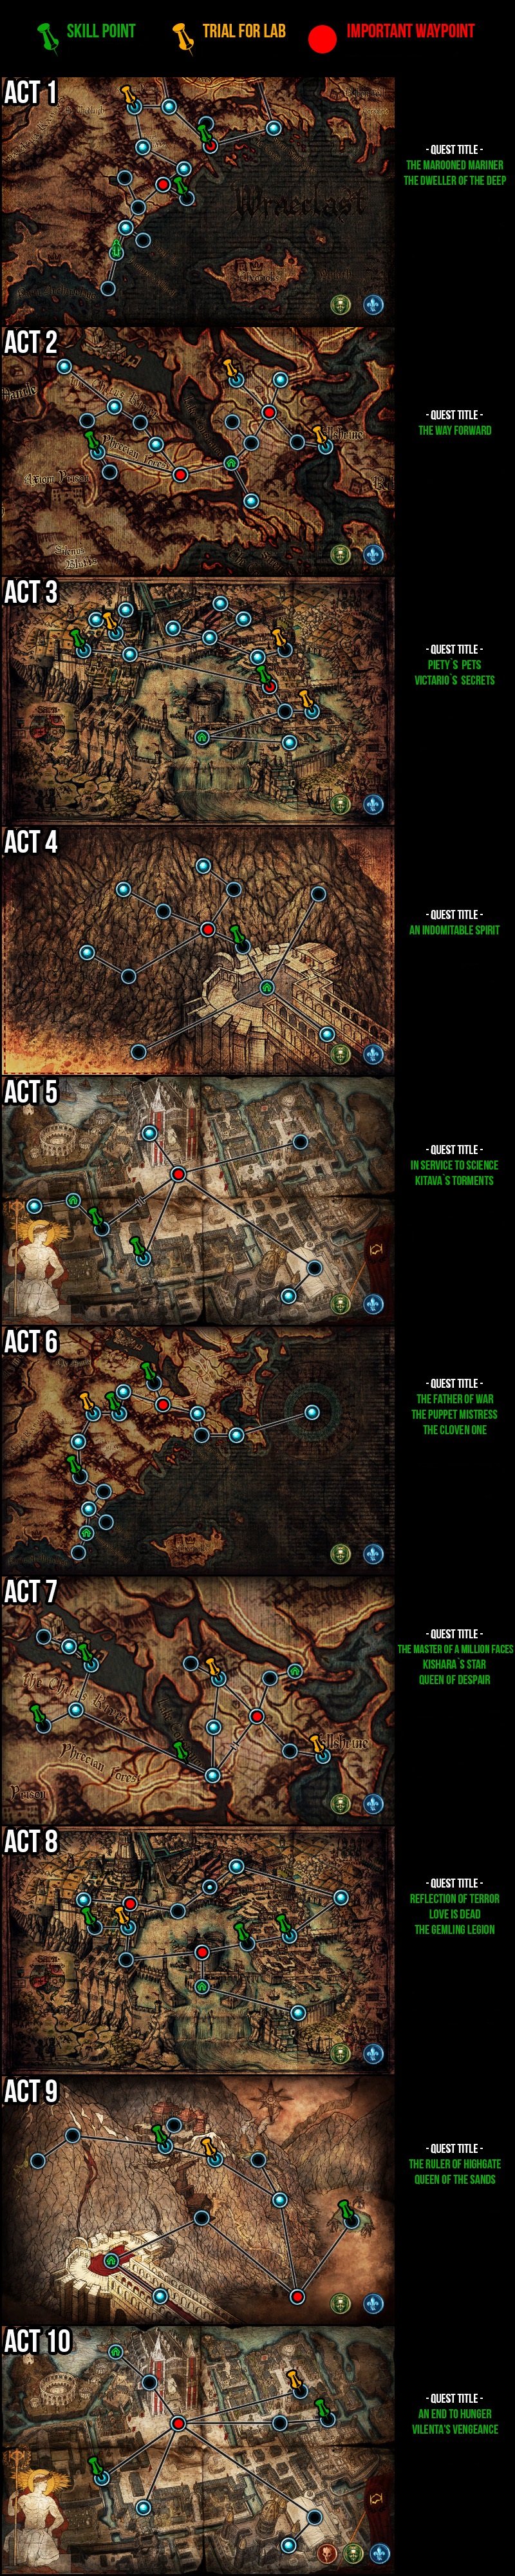 path of exile (poe) skill point quests maps